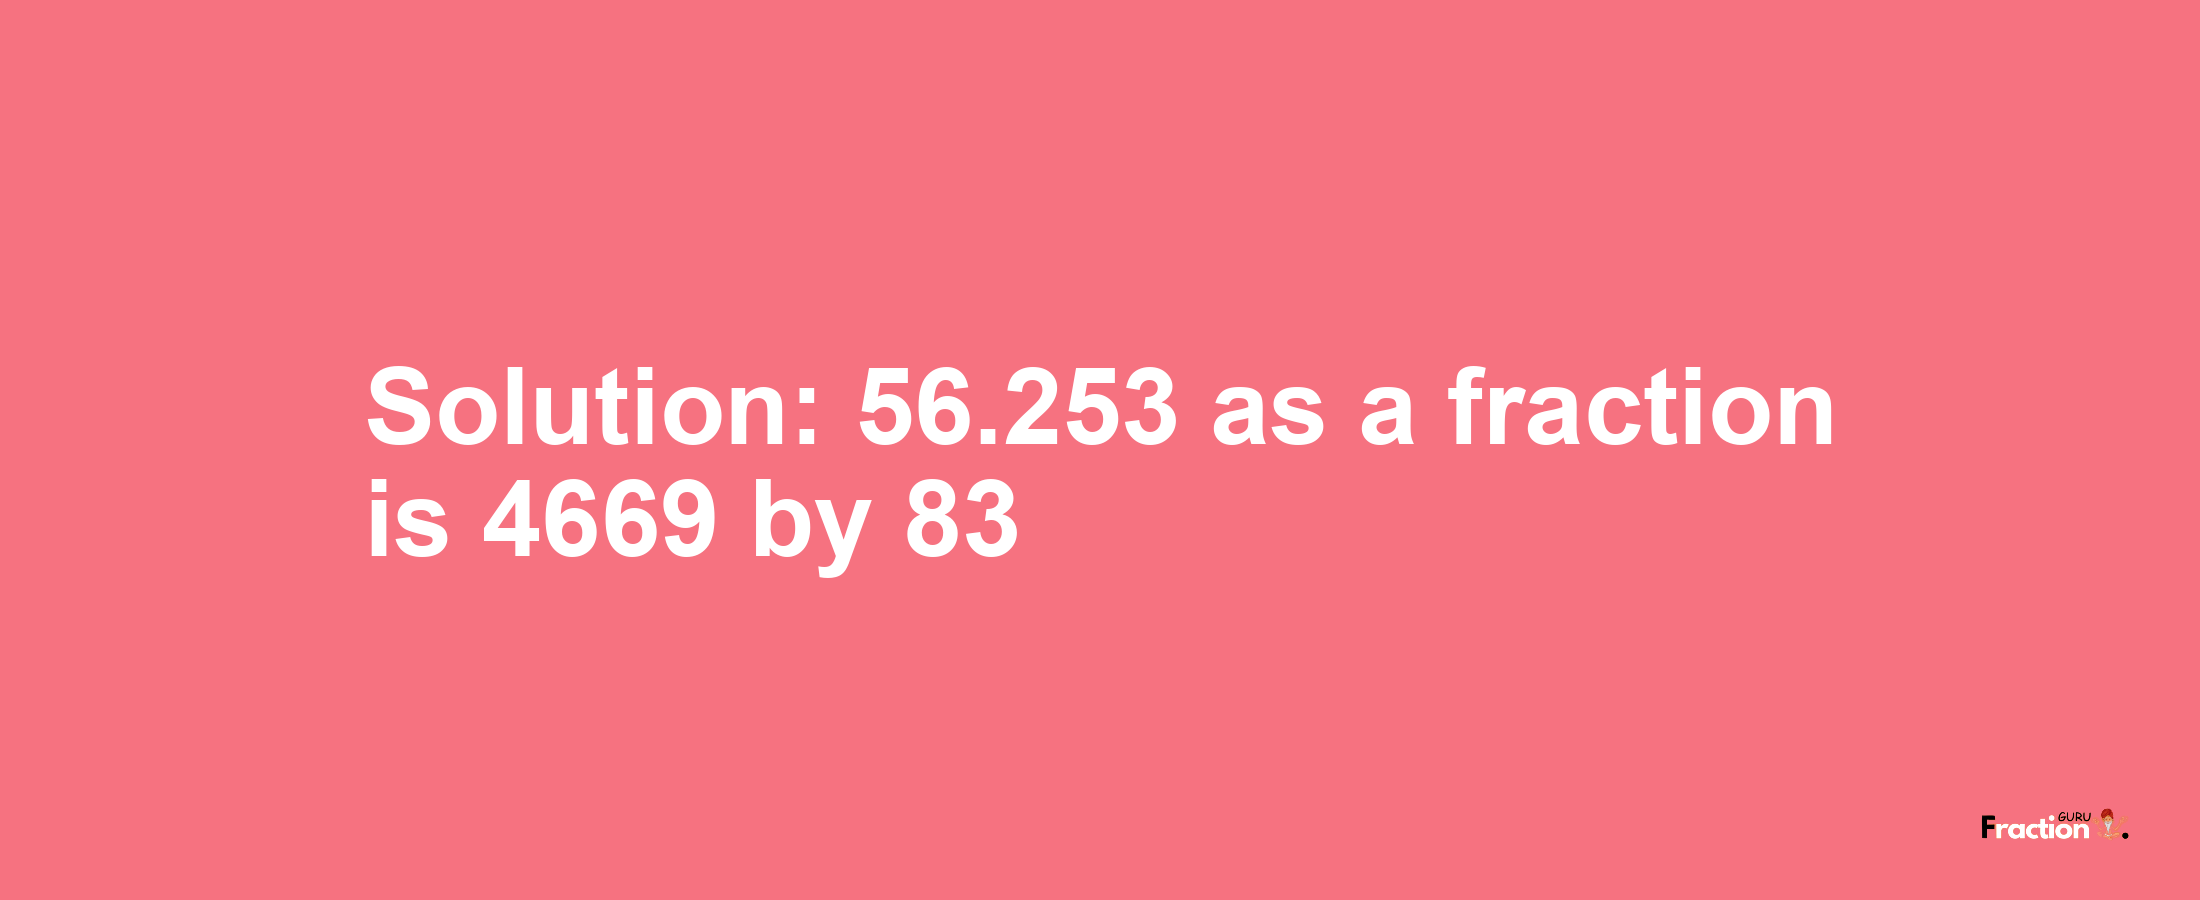 Solution:56.253 as a fraction is 4669/83